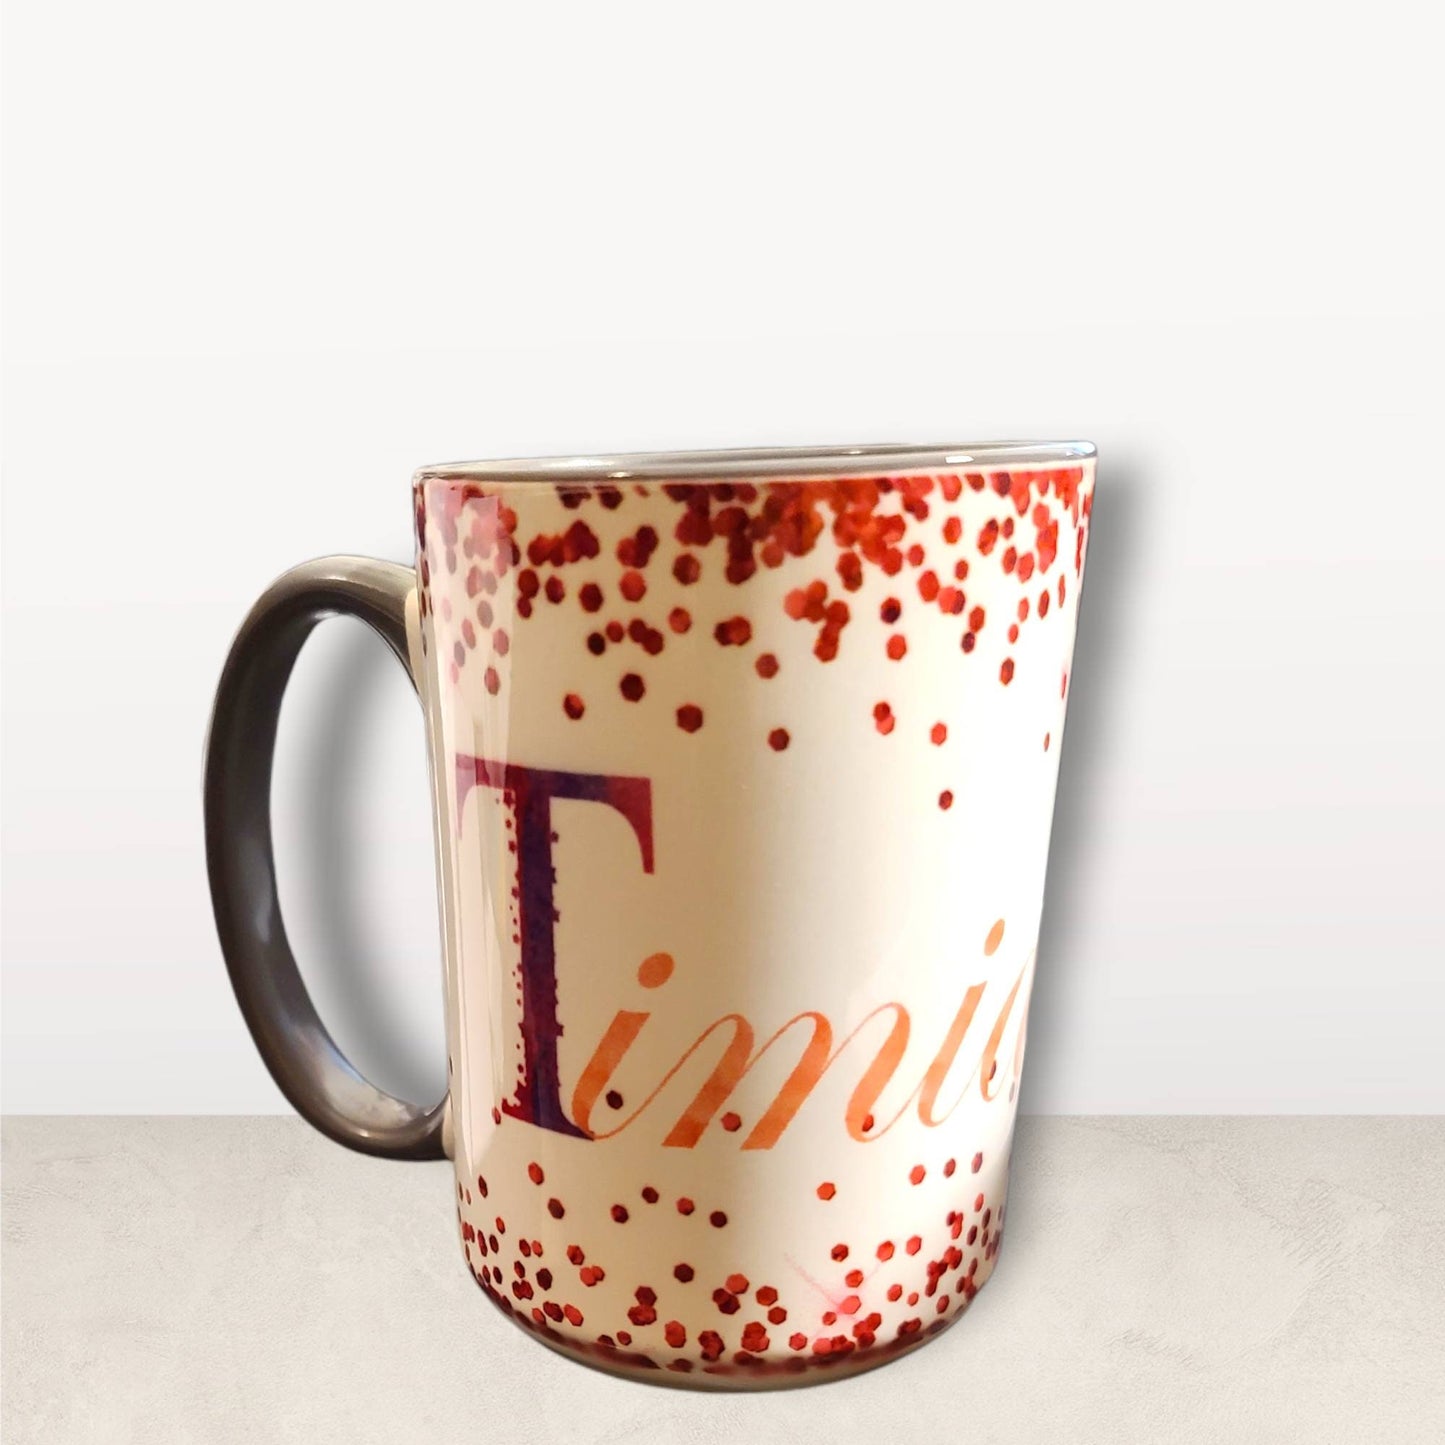 Customized coffee mug personalized with a name. Beveled ceramic mug with glitter design. Personalized coffee cup for a gift. drinkware